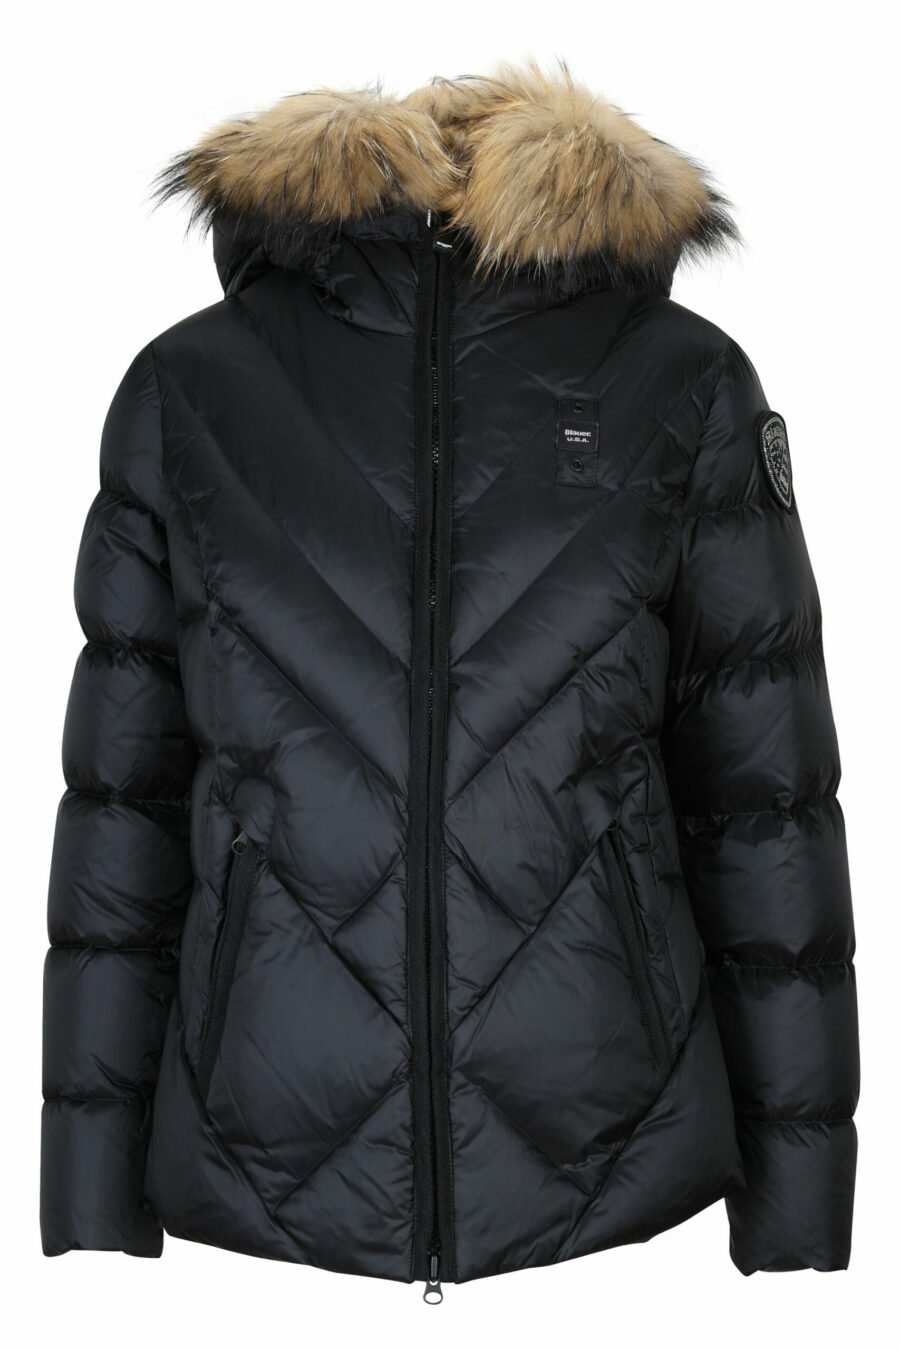 Black hooded fur hooded jacket with diagonal lines and beige lining - 8058610647070 scaled